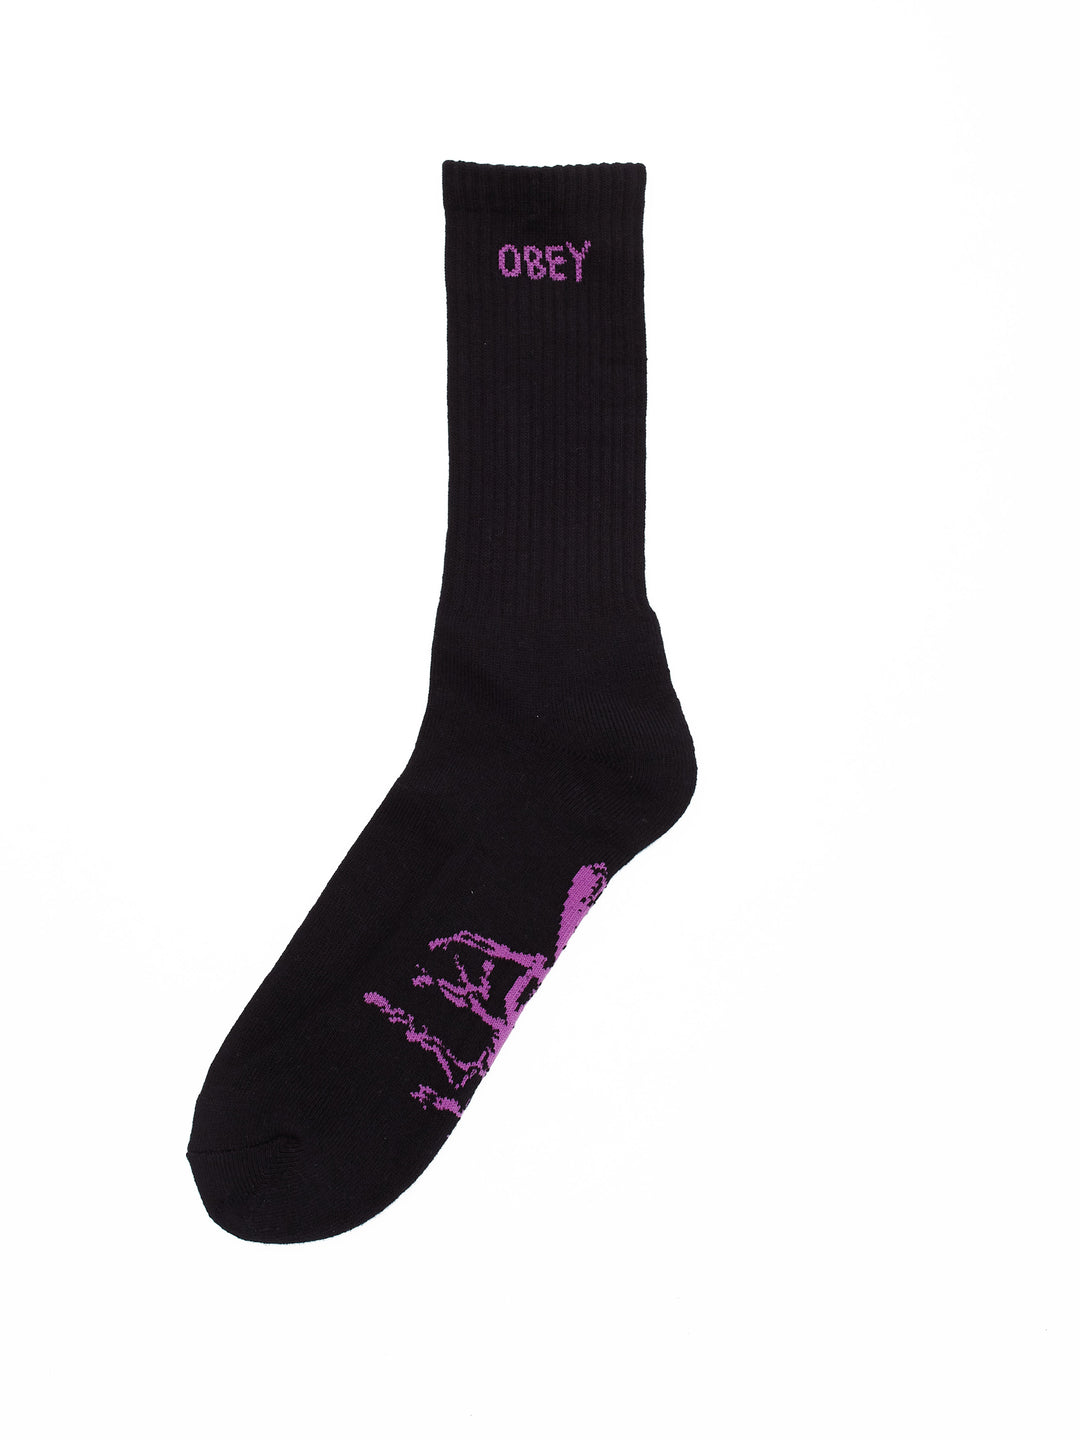 Buzz Socks | Black - West of Camden - Main Image Number 1 of 1